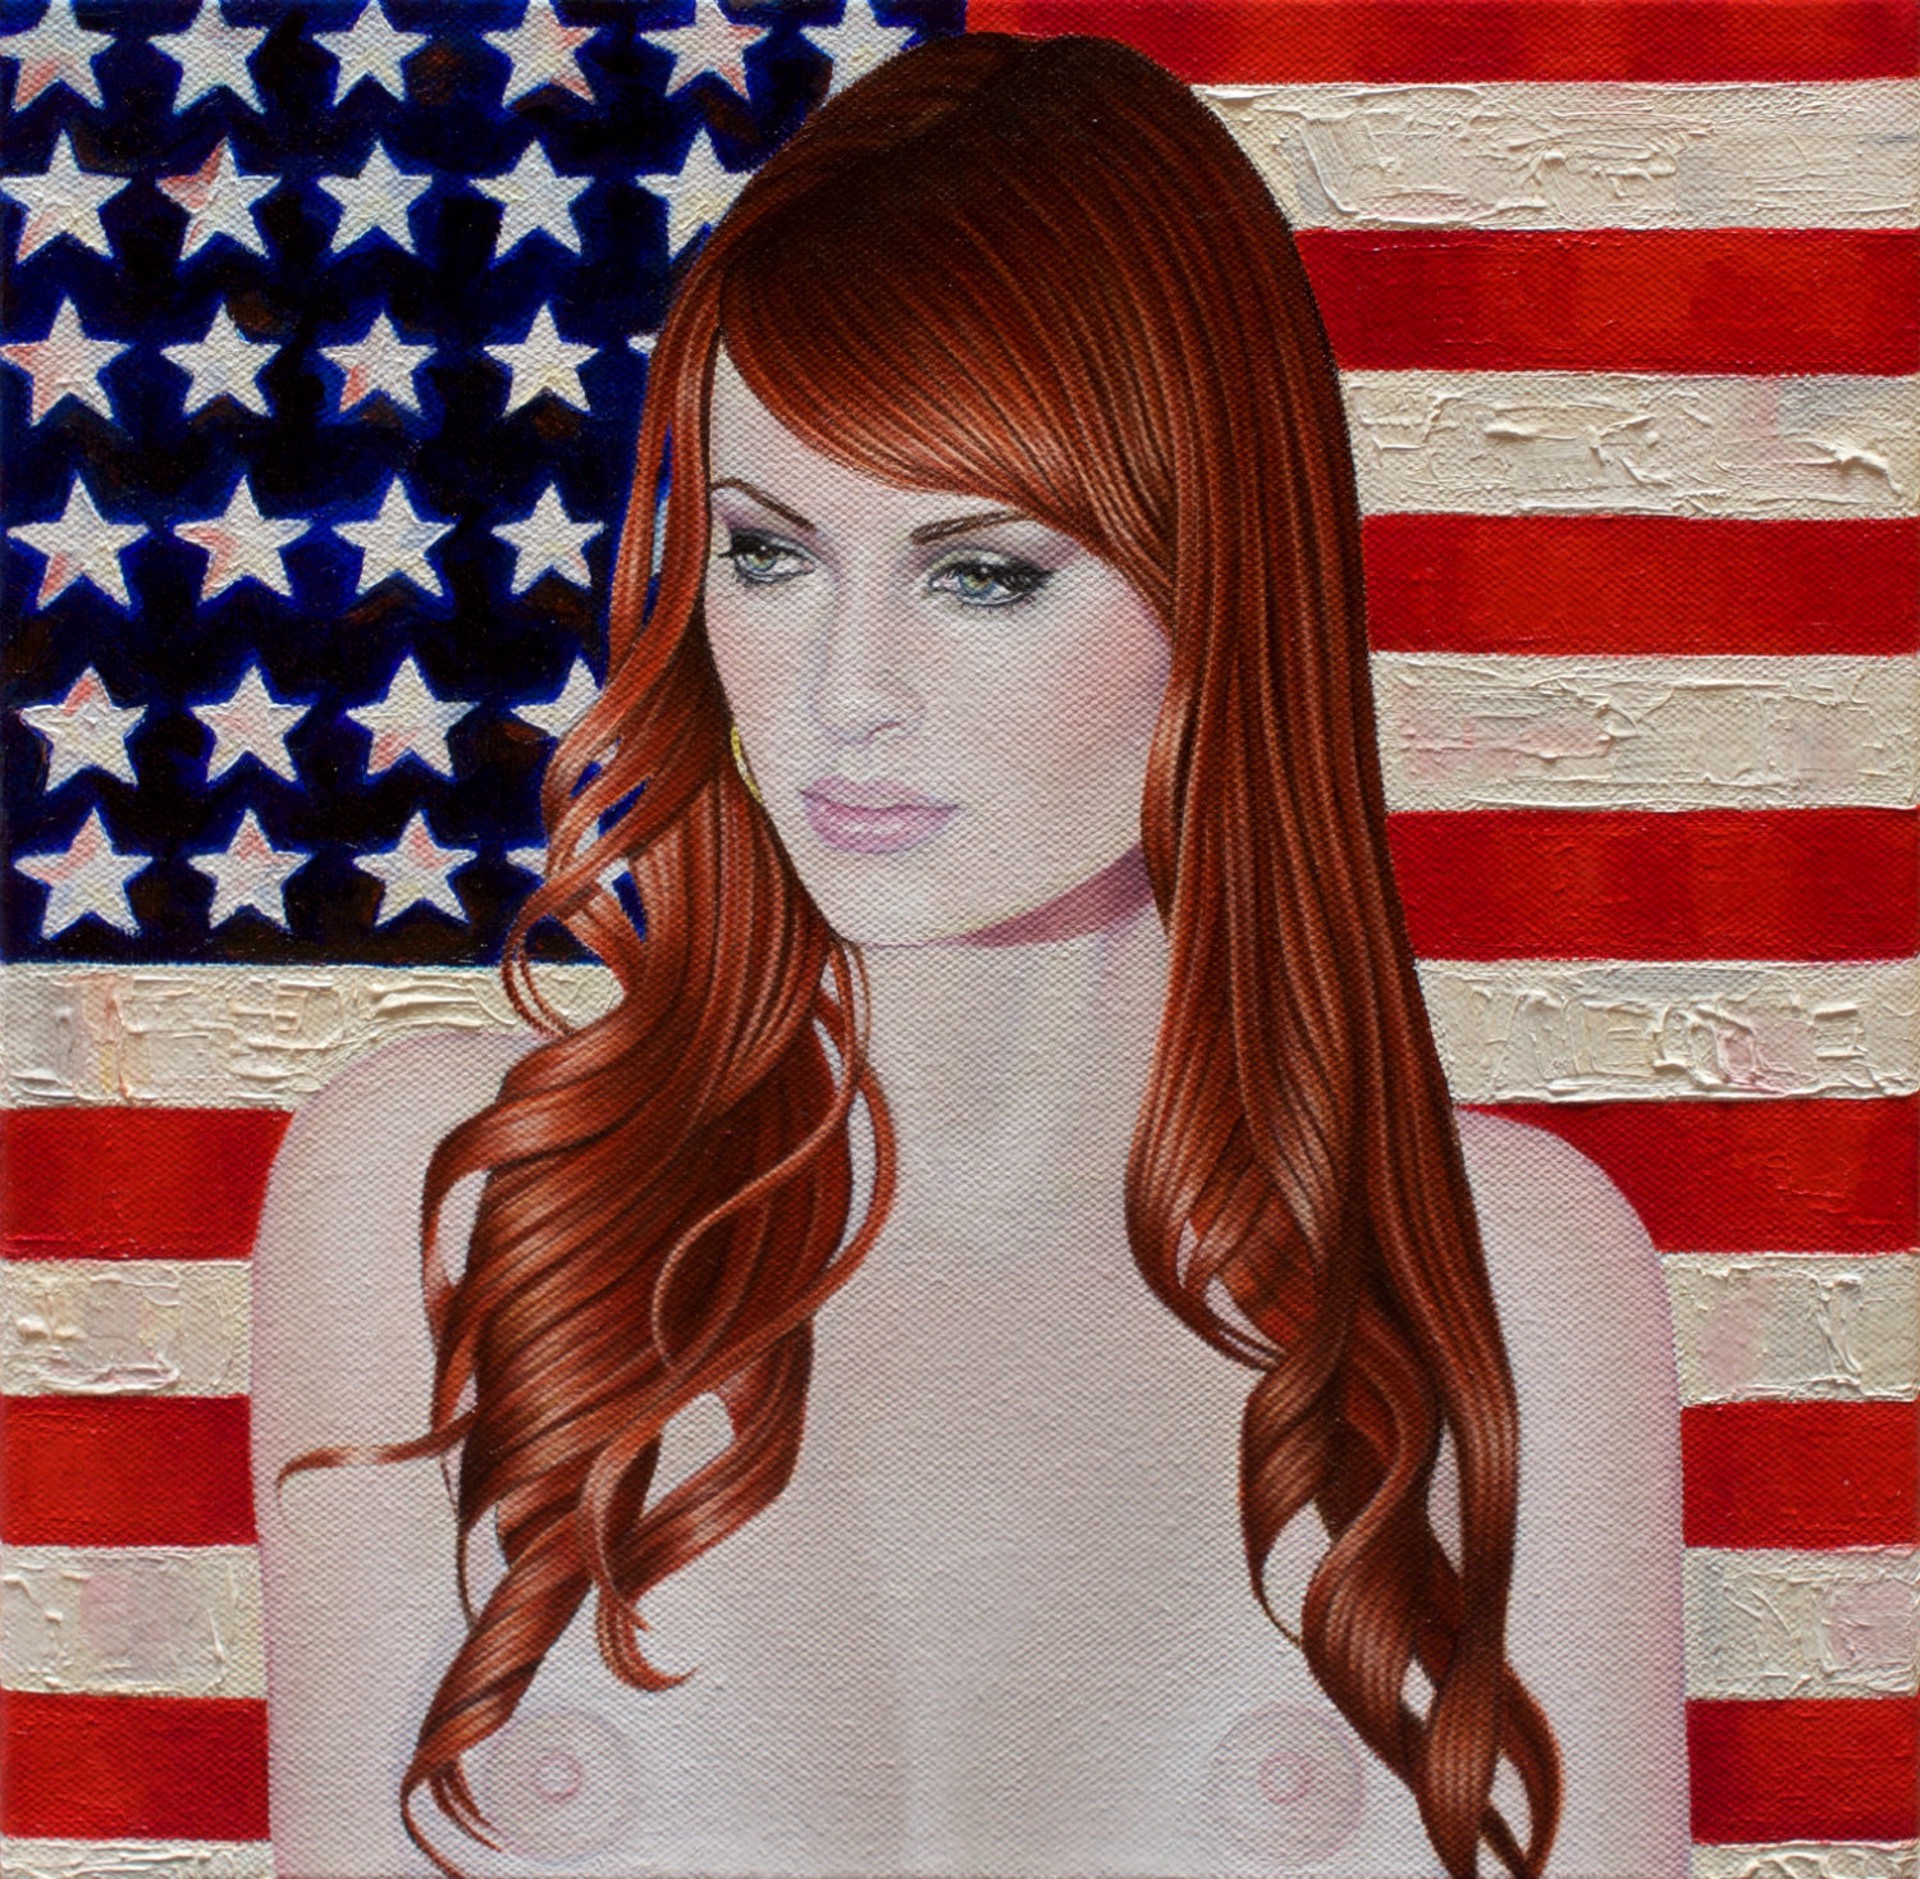 American Woman by Suzy Smith